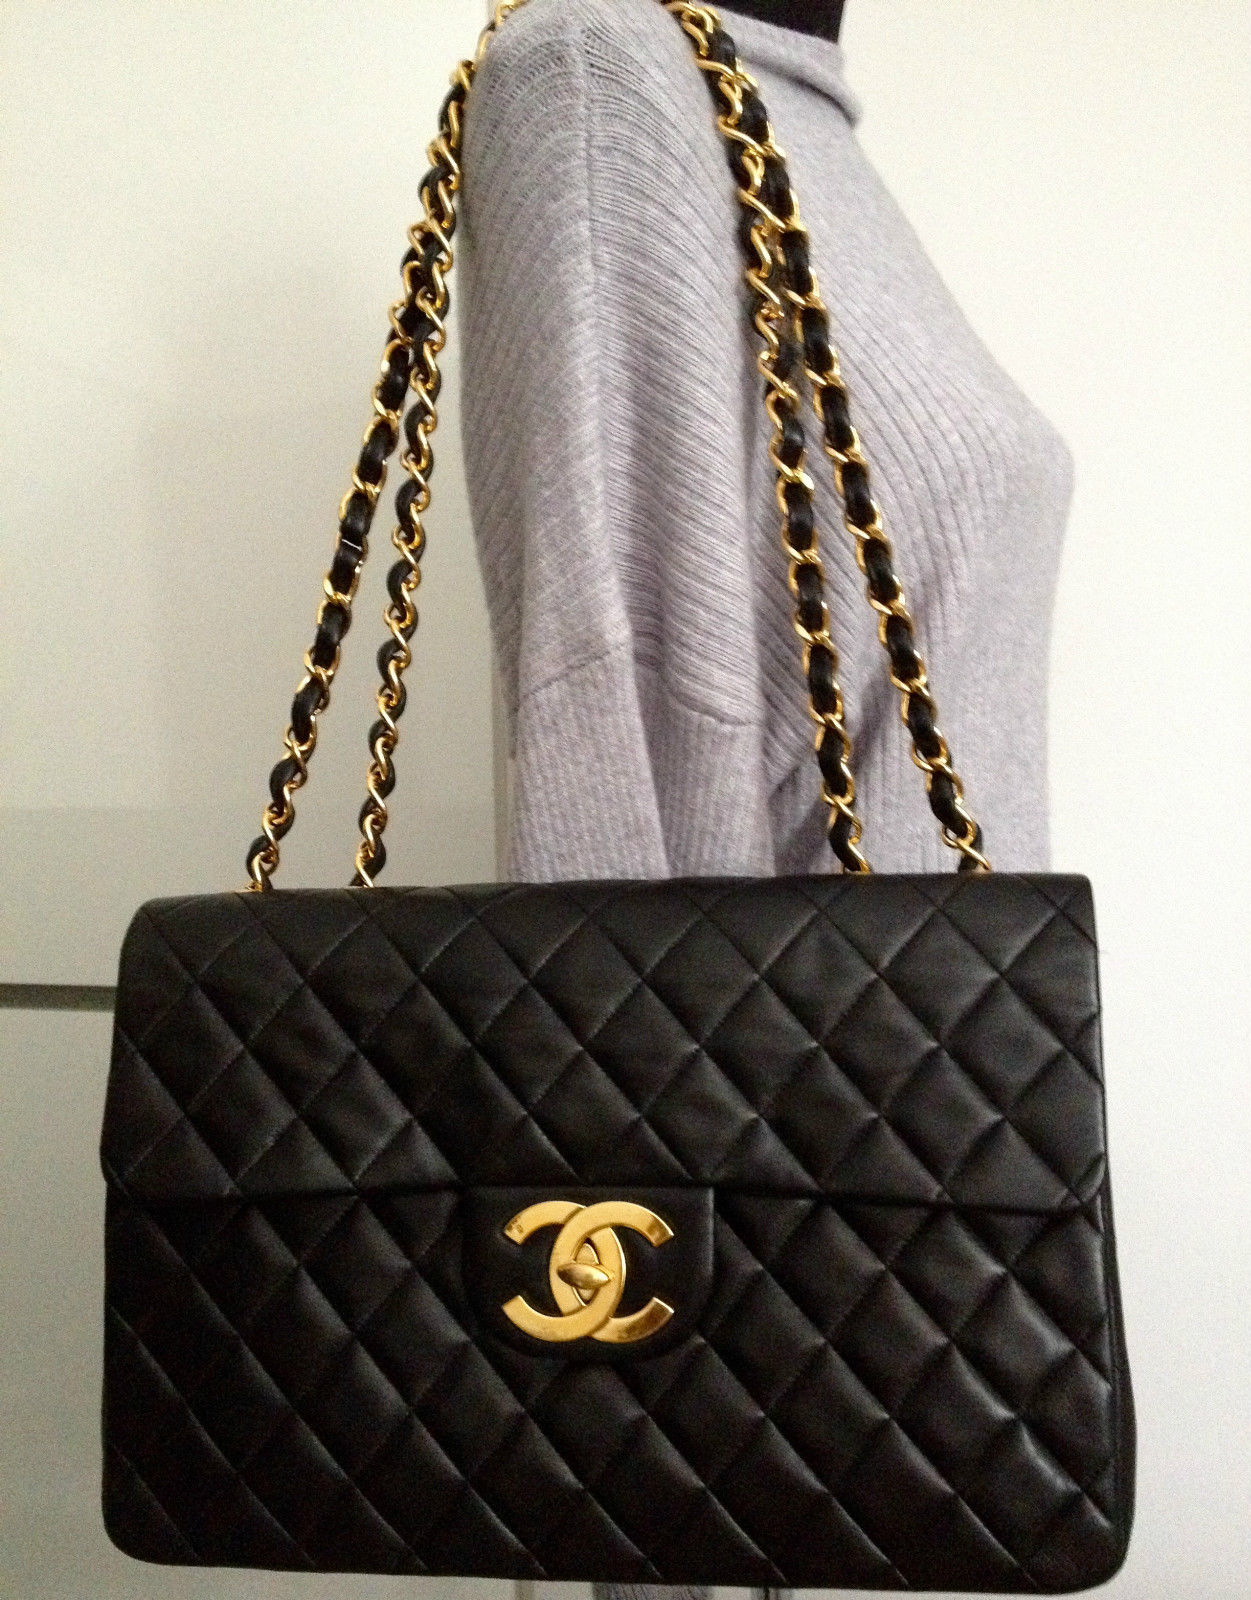 white chanel 2.55 double